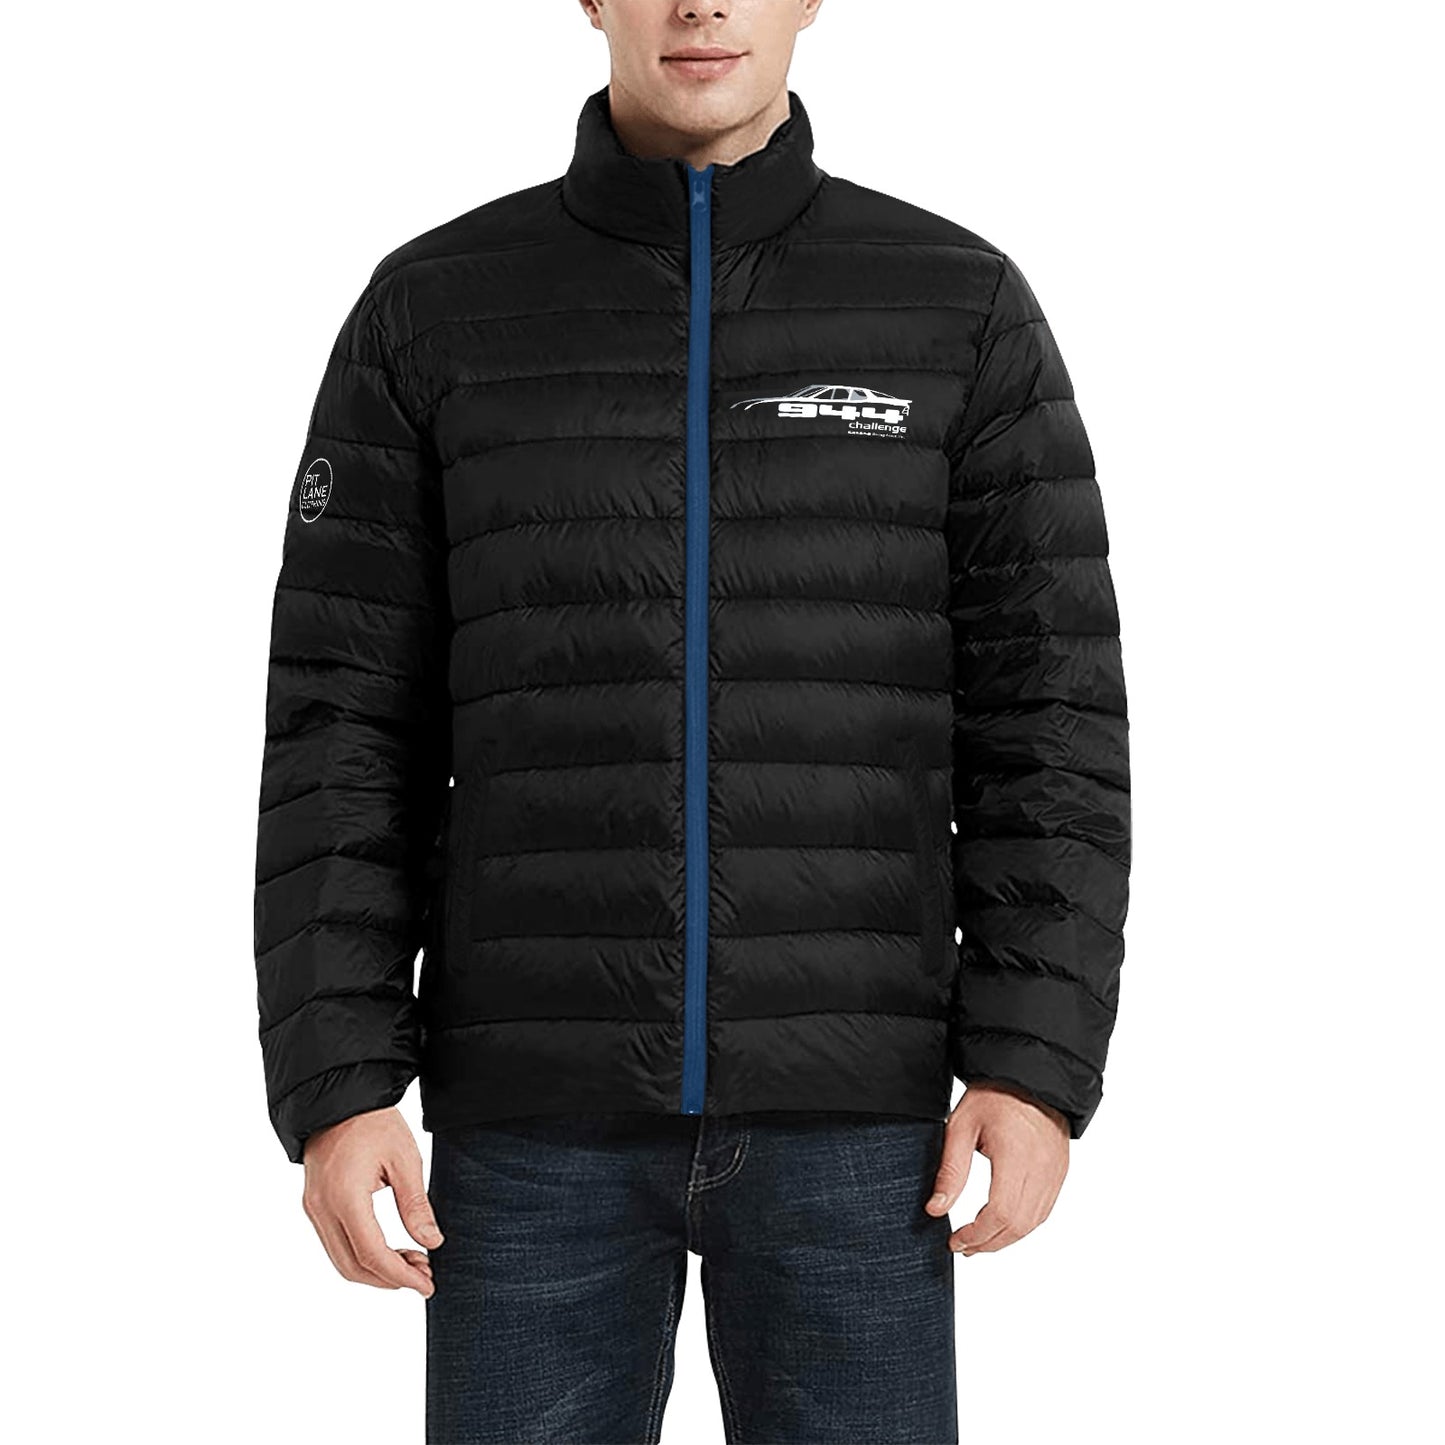 944 Challenge Series Australia official puffer jacket - carbon